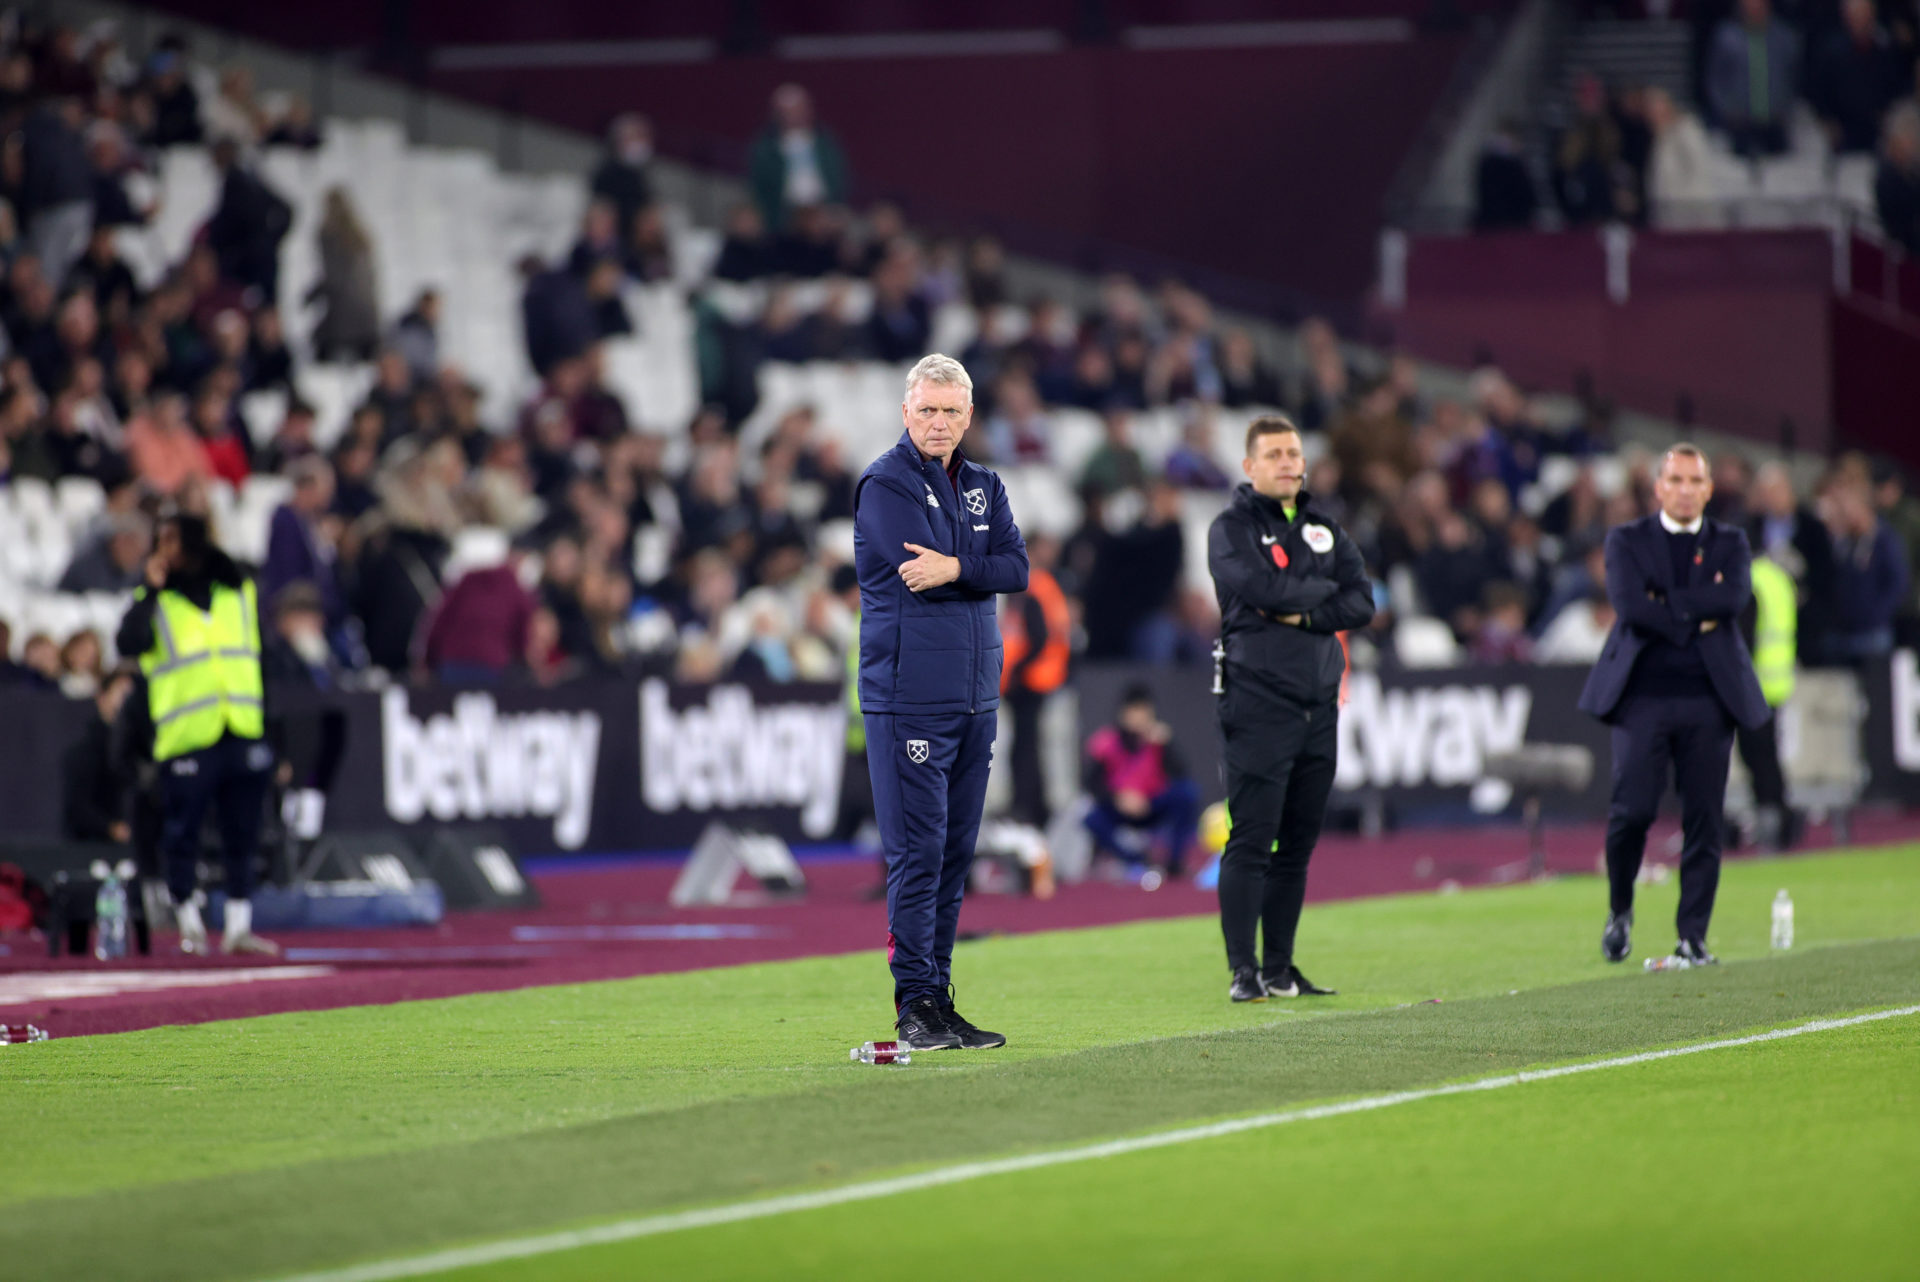 David Moyes shares what he said to West Ham players after Leicester defeat